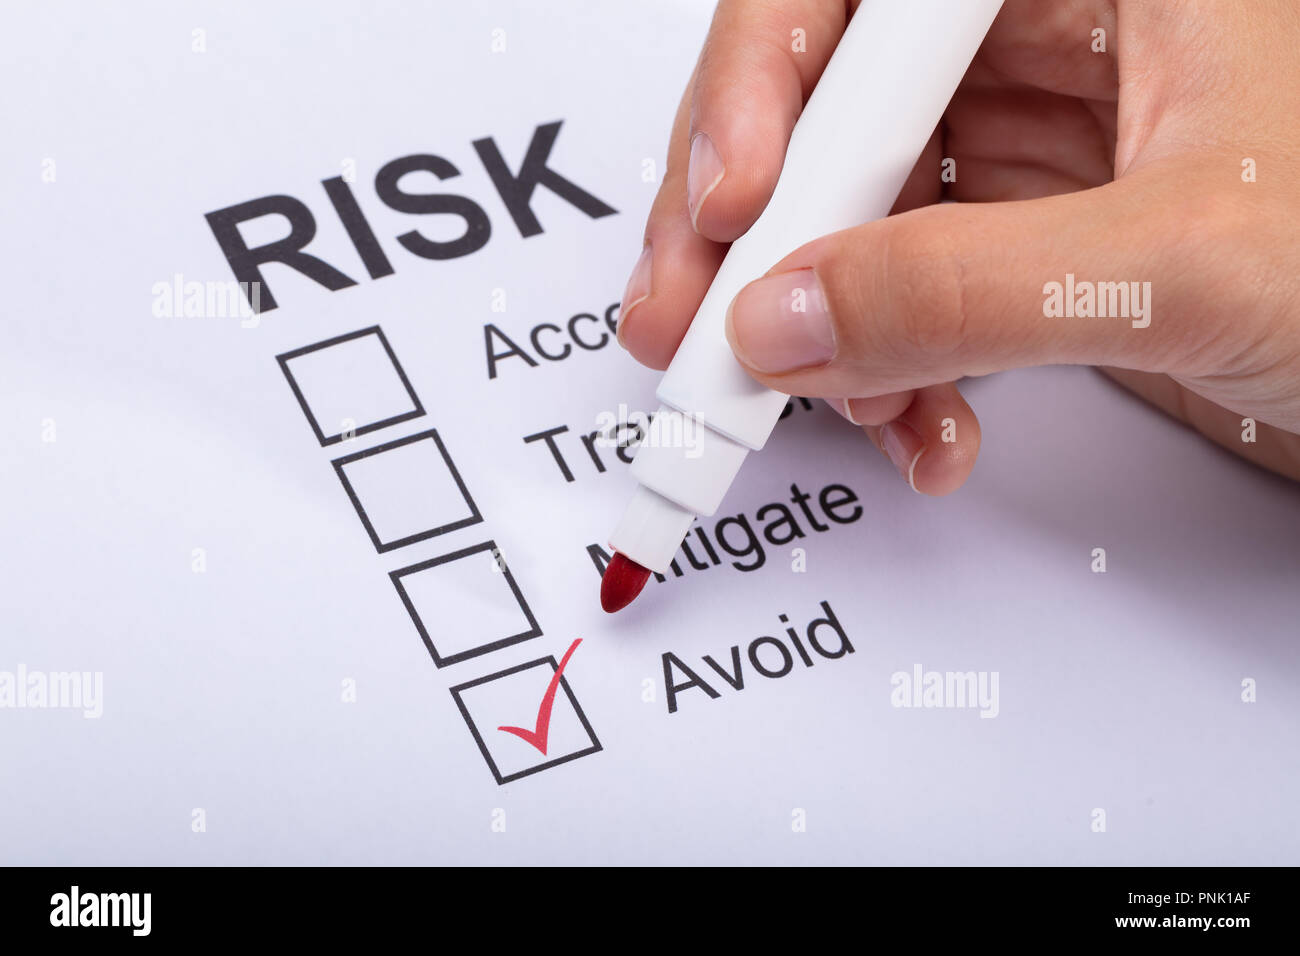 Close-up Of A Woman's Hand Ticking Avoid Option On Risk Form With Marker Stock Photo